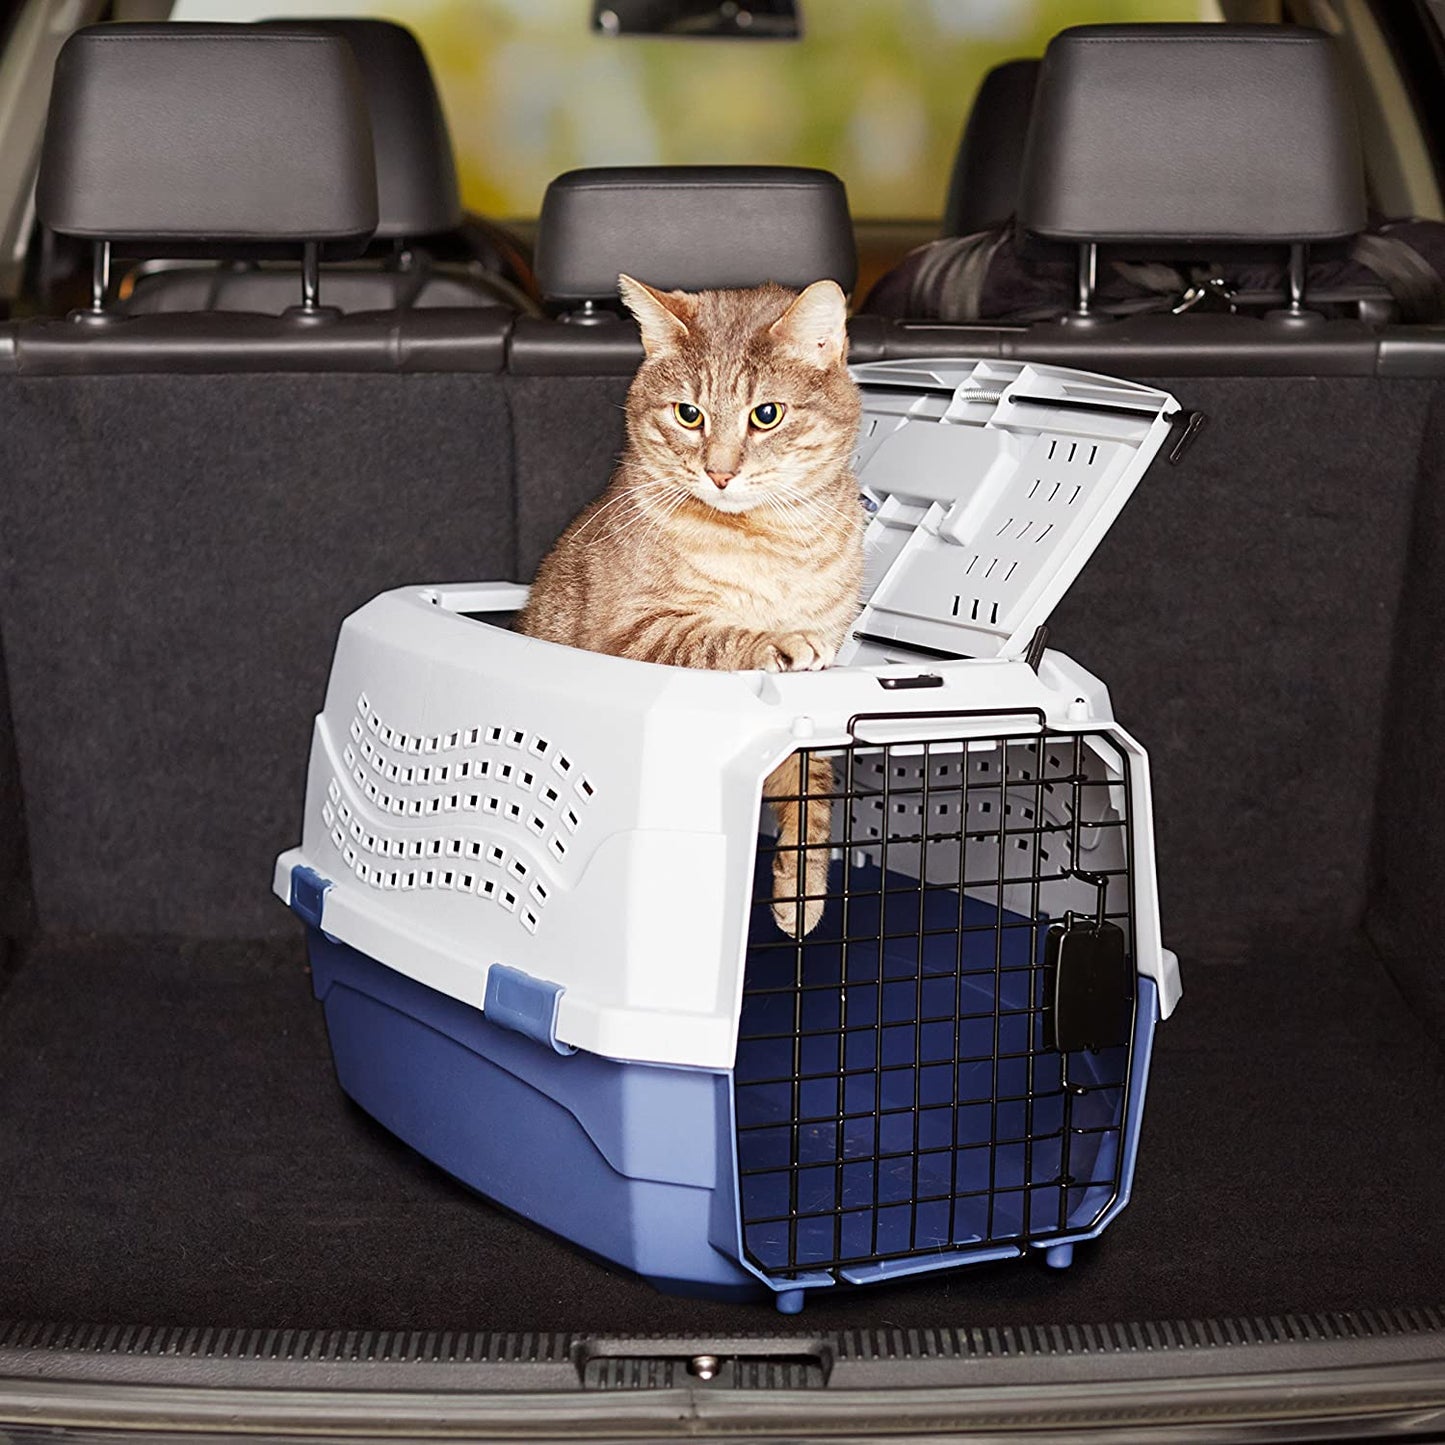 2-Door Top Load Hard Sided Dog and Cat Kennel Travel Carrier, 23-Inch, Gray & Blue